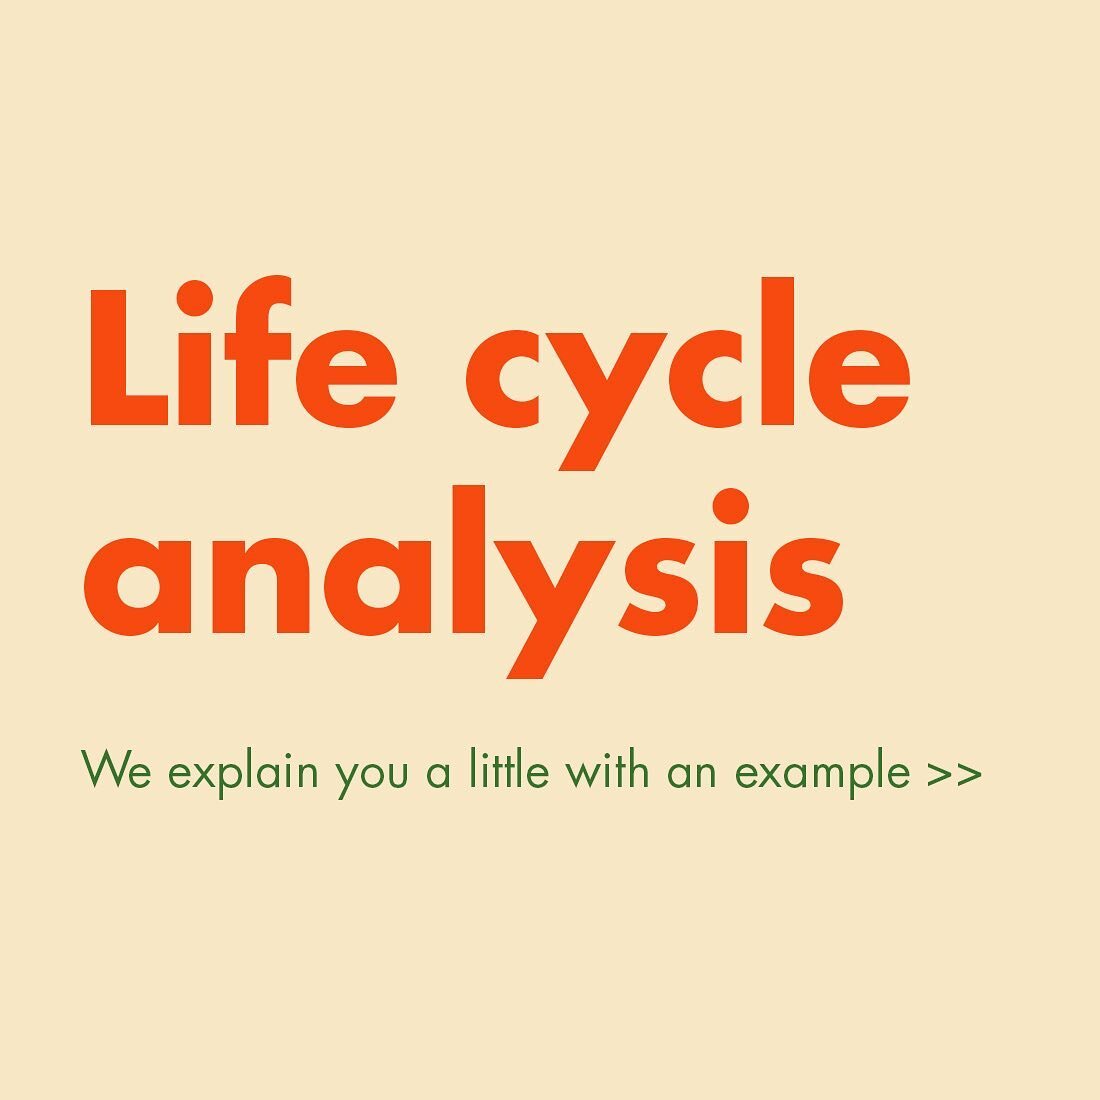 We know that it is increasingly important that the products we consume and produce have the lowest possible environmental impact. But how can we be sure of it?
For this reason, it is important to carry out life cycle analysis (LCA) to evaluate the im